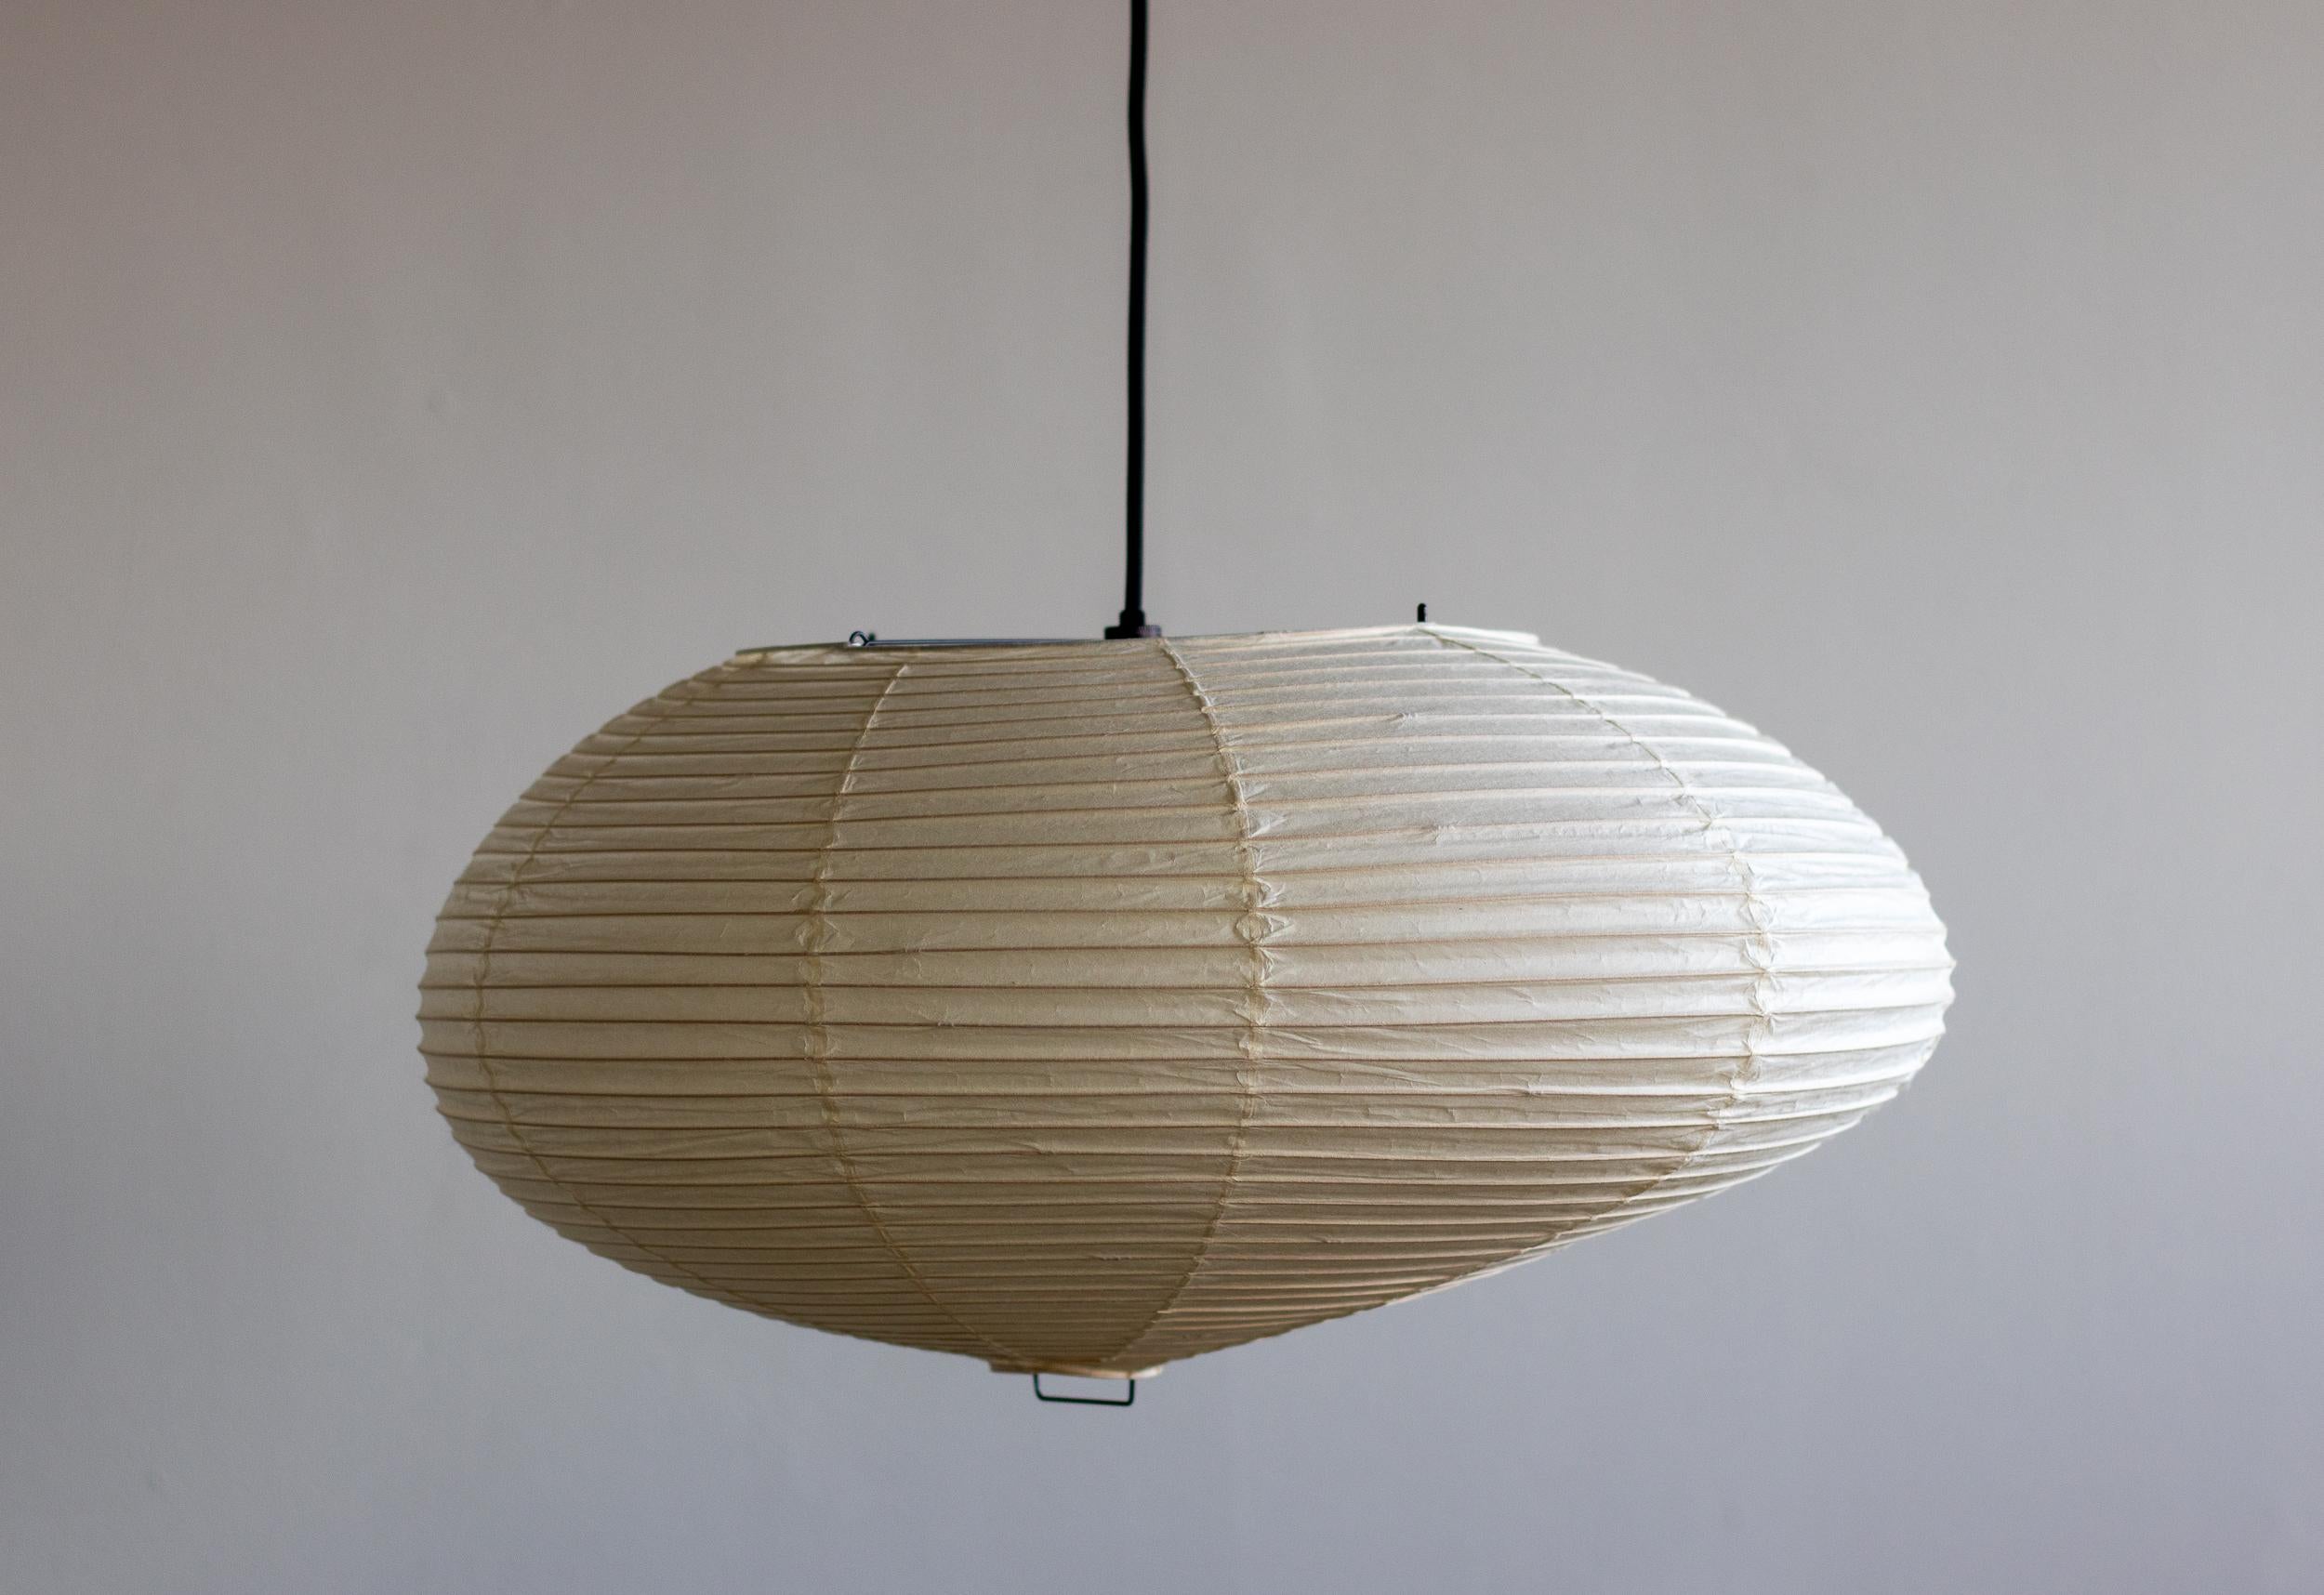 Akari 75D lamp designed by Isamu Noguchi, 1951. Manufactured by Ozeki & Co. in Japan. 
Bambu structure covered by washi paper. Wired for U.S. standards. 
Recent version, new cord and canopy from Noguchi Museum. 
This fixture has one socket. We